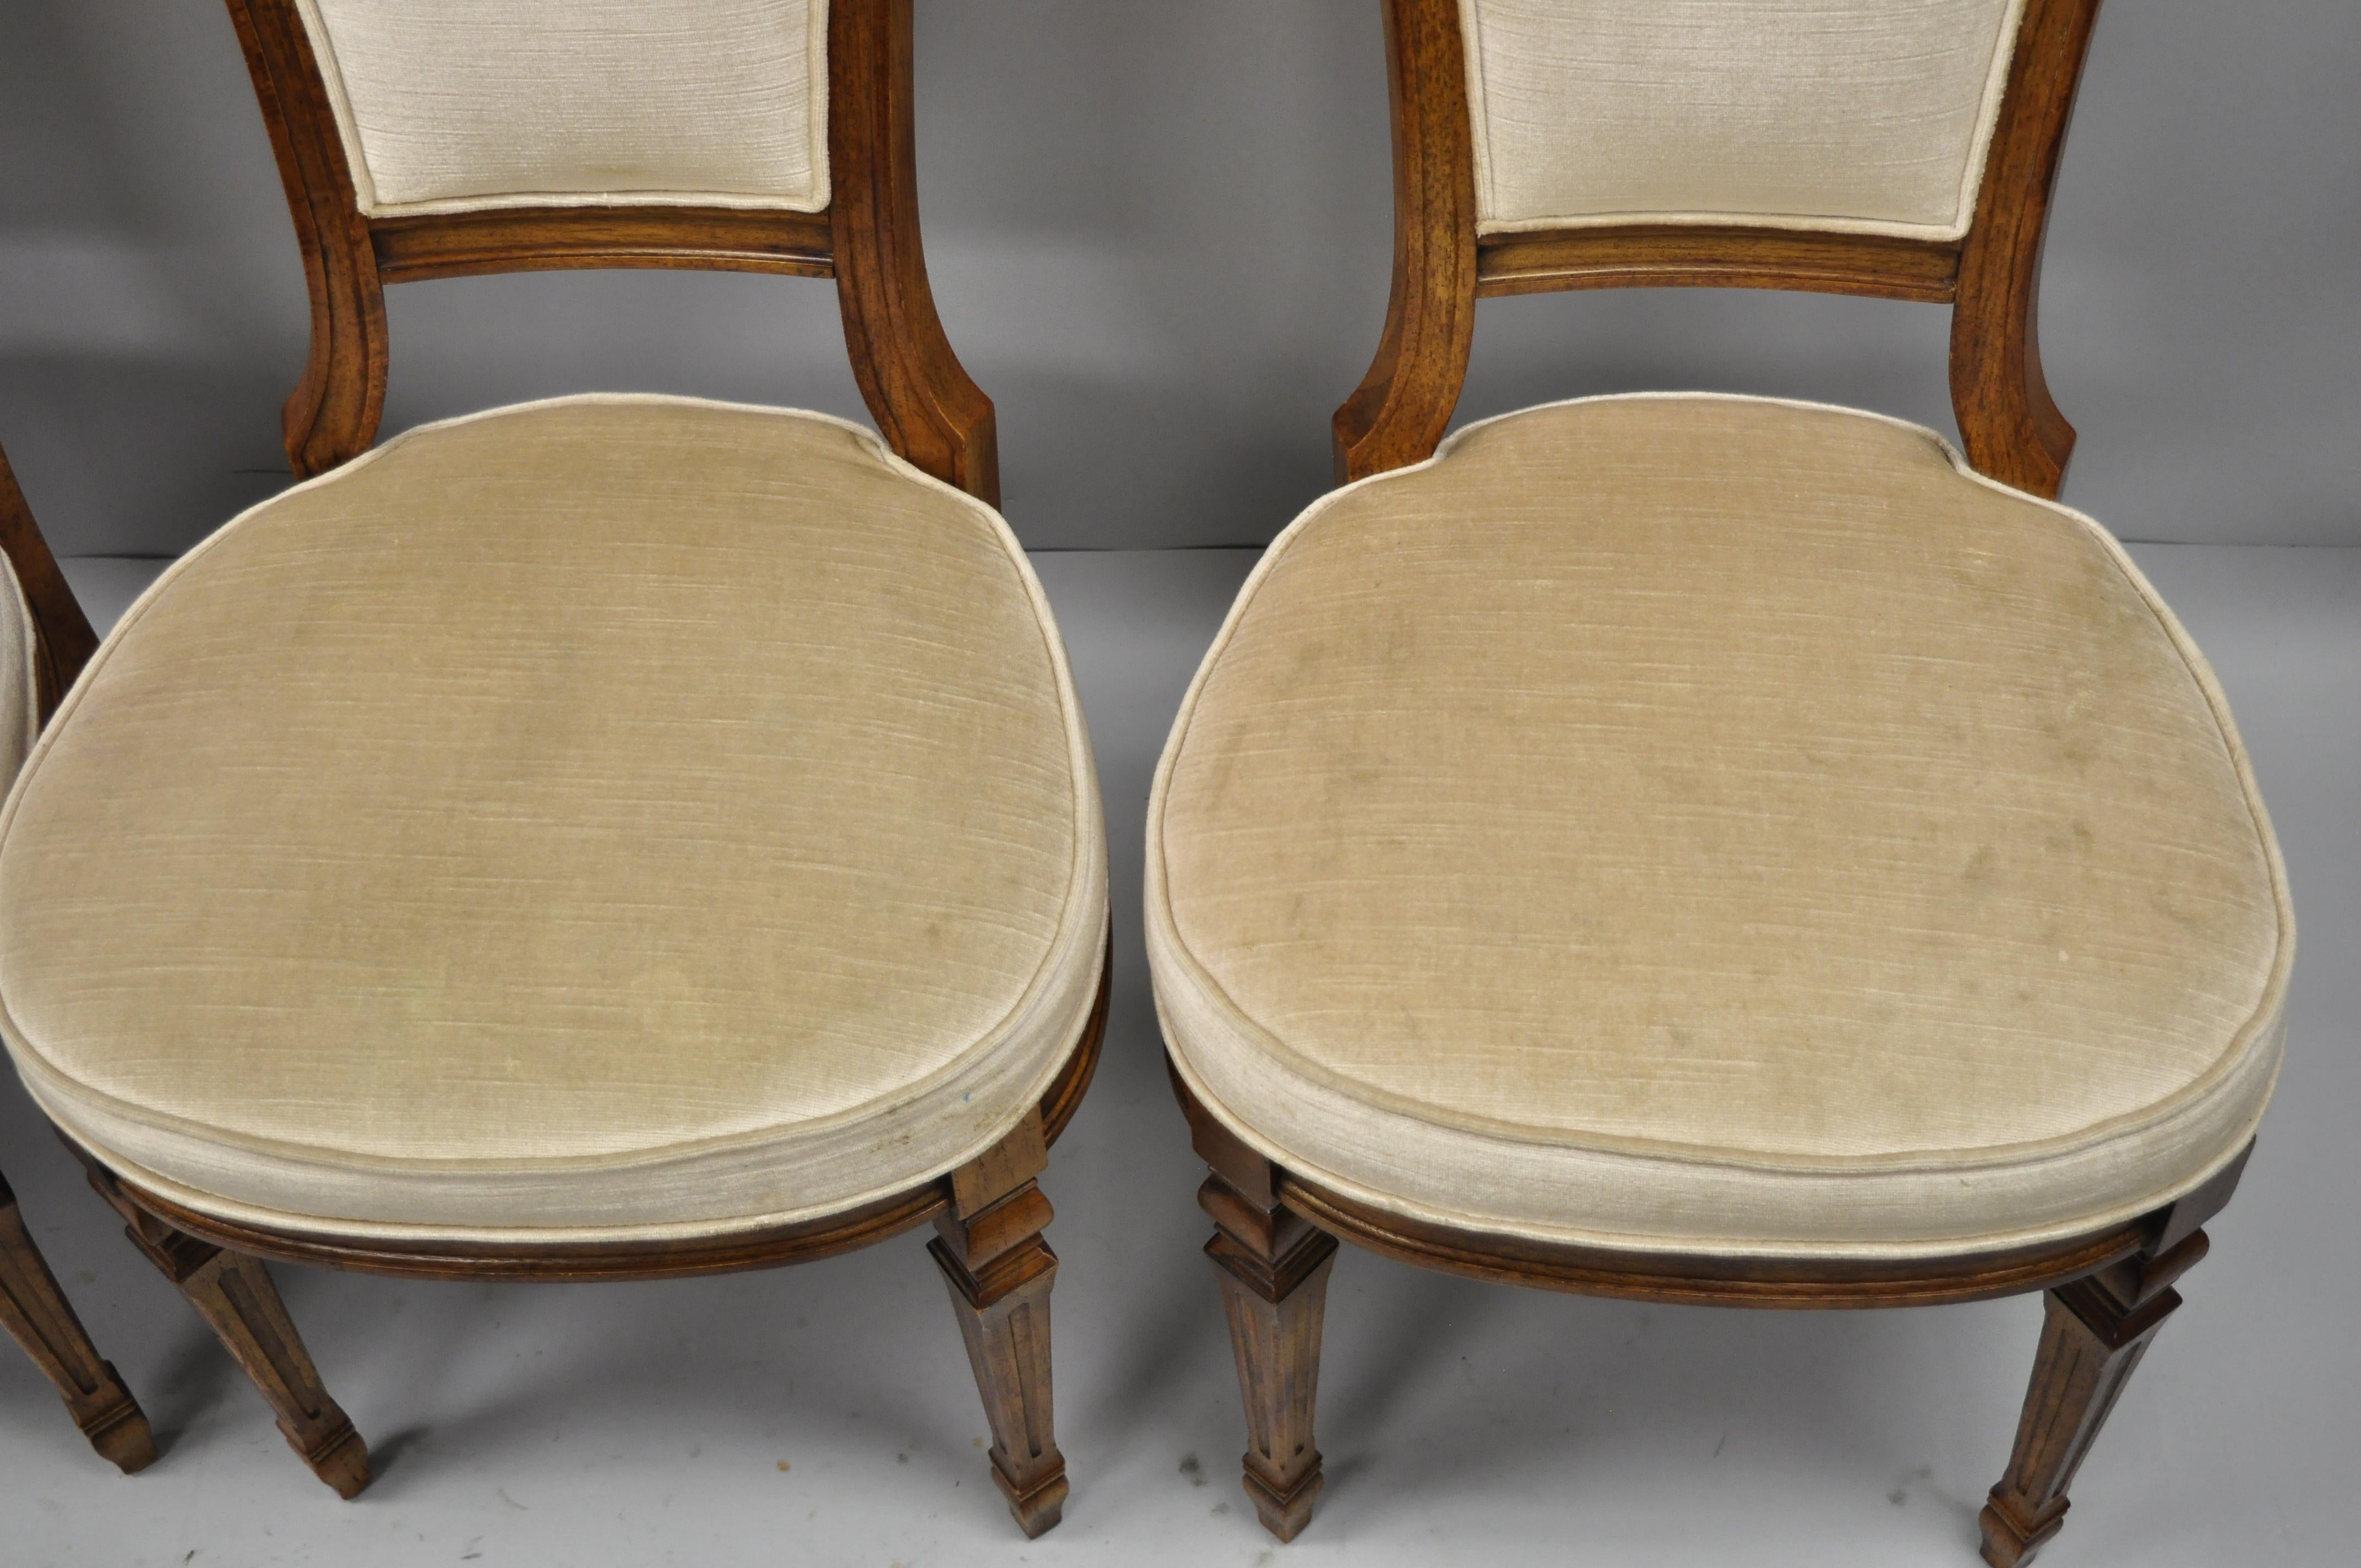 20th Century Four Drexel Heritage French Empire Regency Style Dining Side Chairs